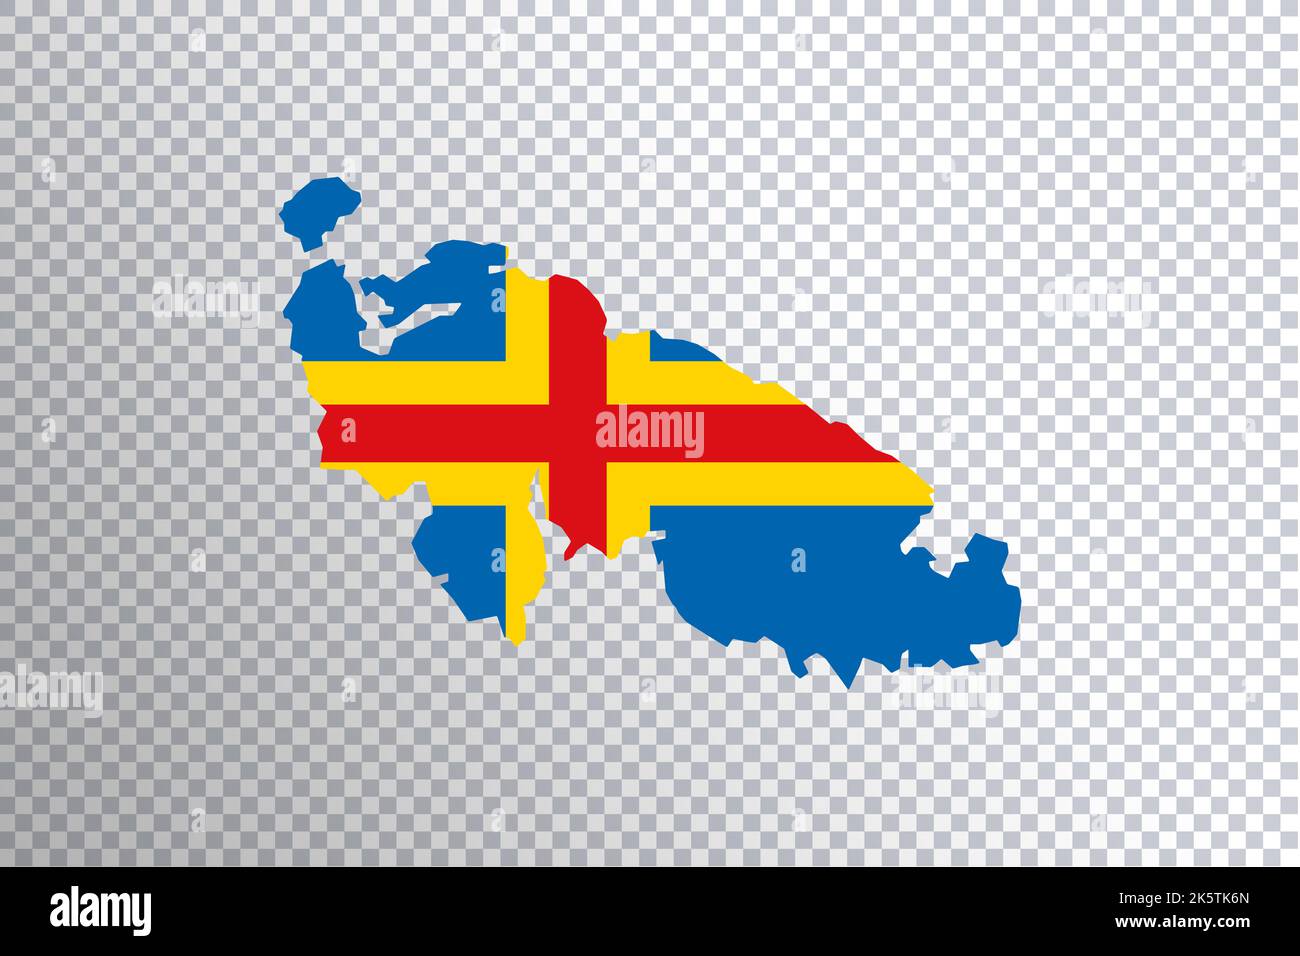 Aland Islands flag on map, transparent background, Clipping path Stock Photo